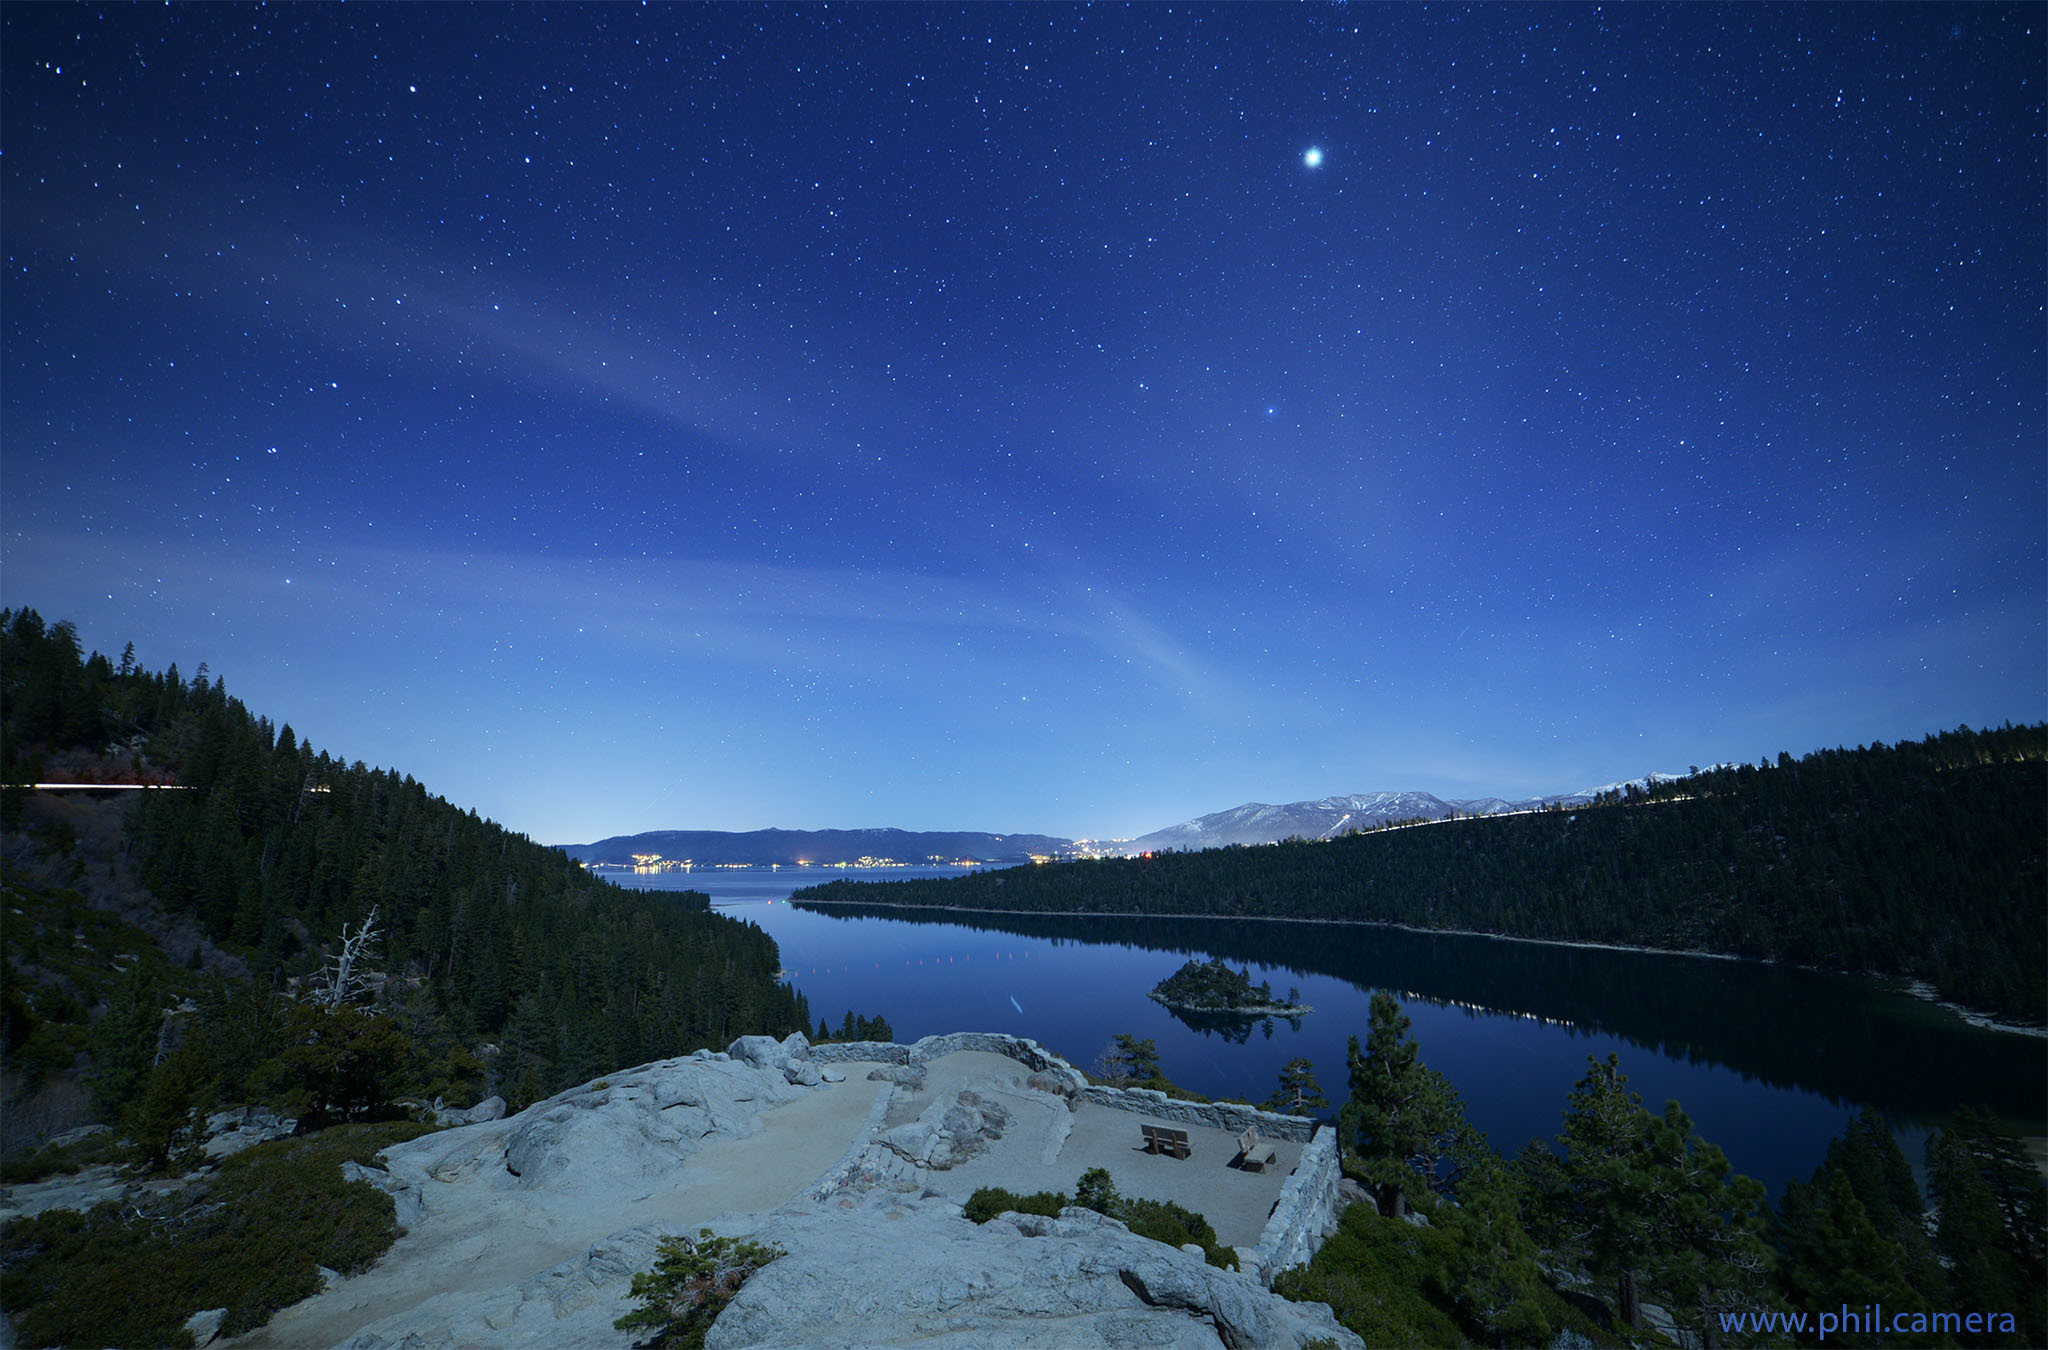 2048x1350 "Moonlight Patio" - overlooking Emerald Bay, Lake Tahoe | by Phil Mosby. "